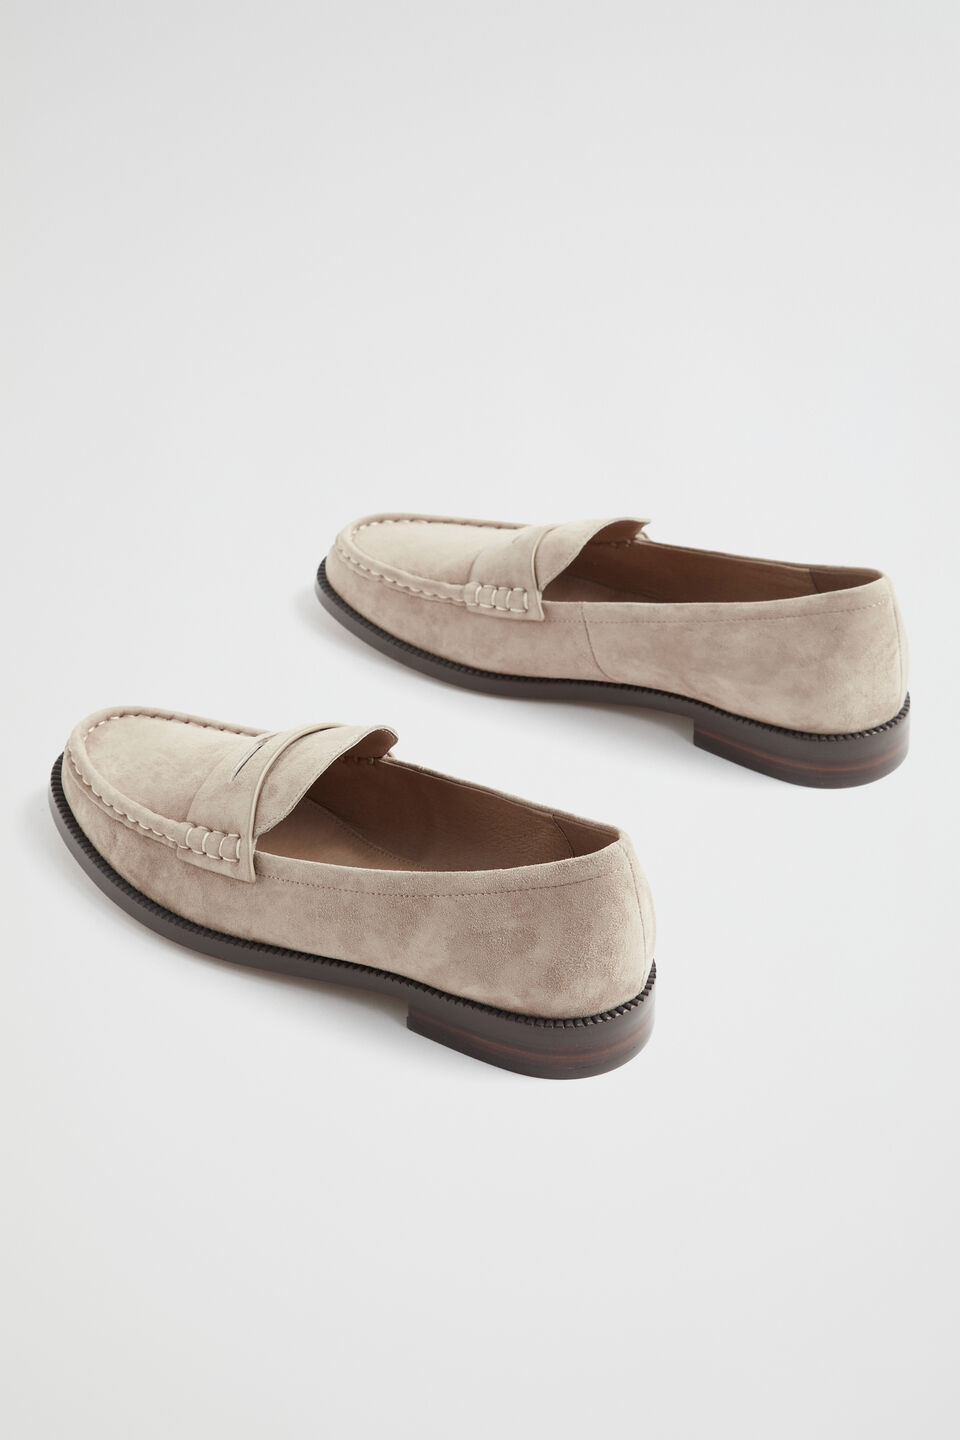 Kendall Leather Penny Loafer  Storm Suede